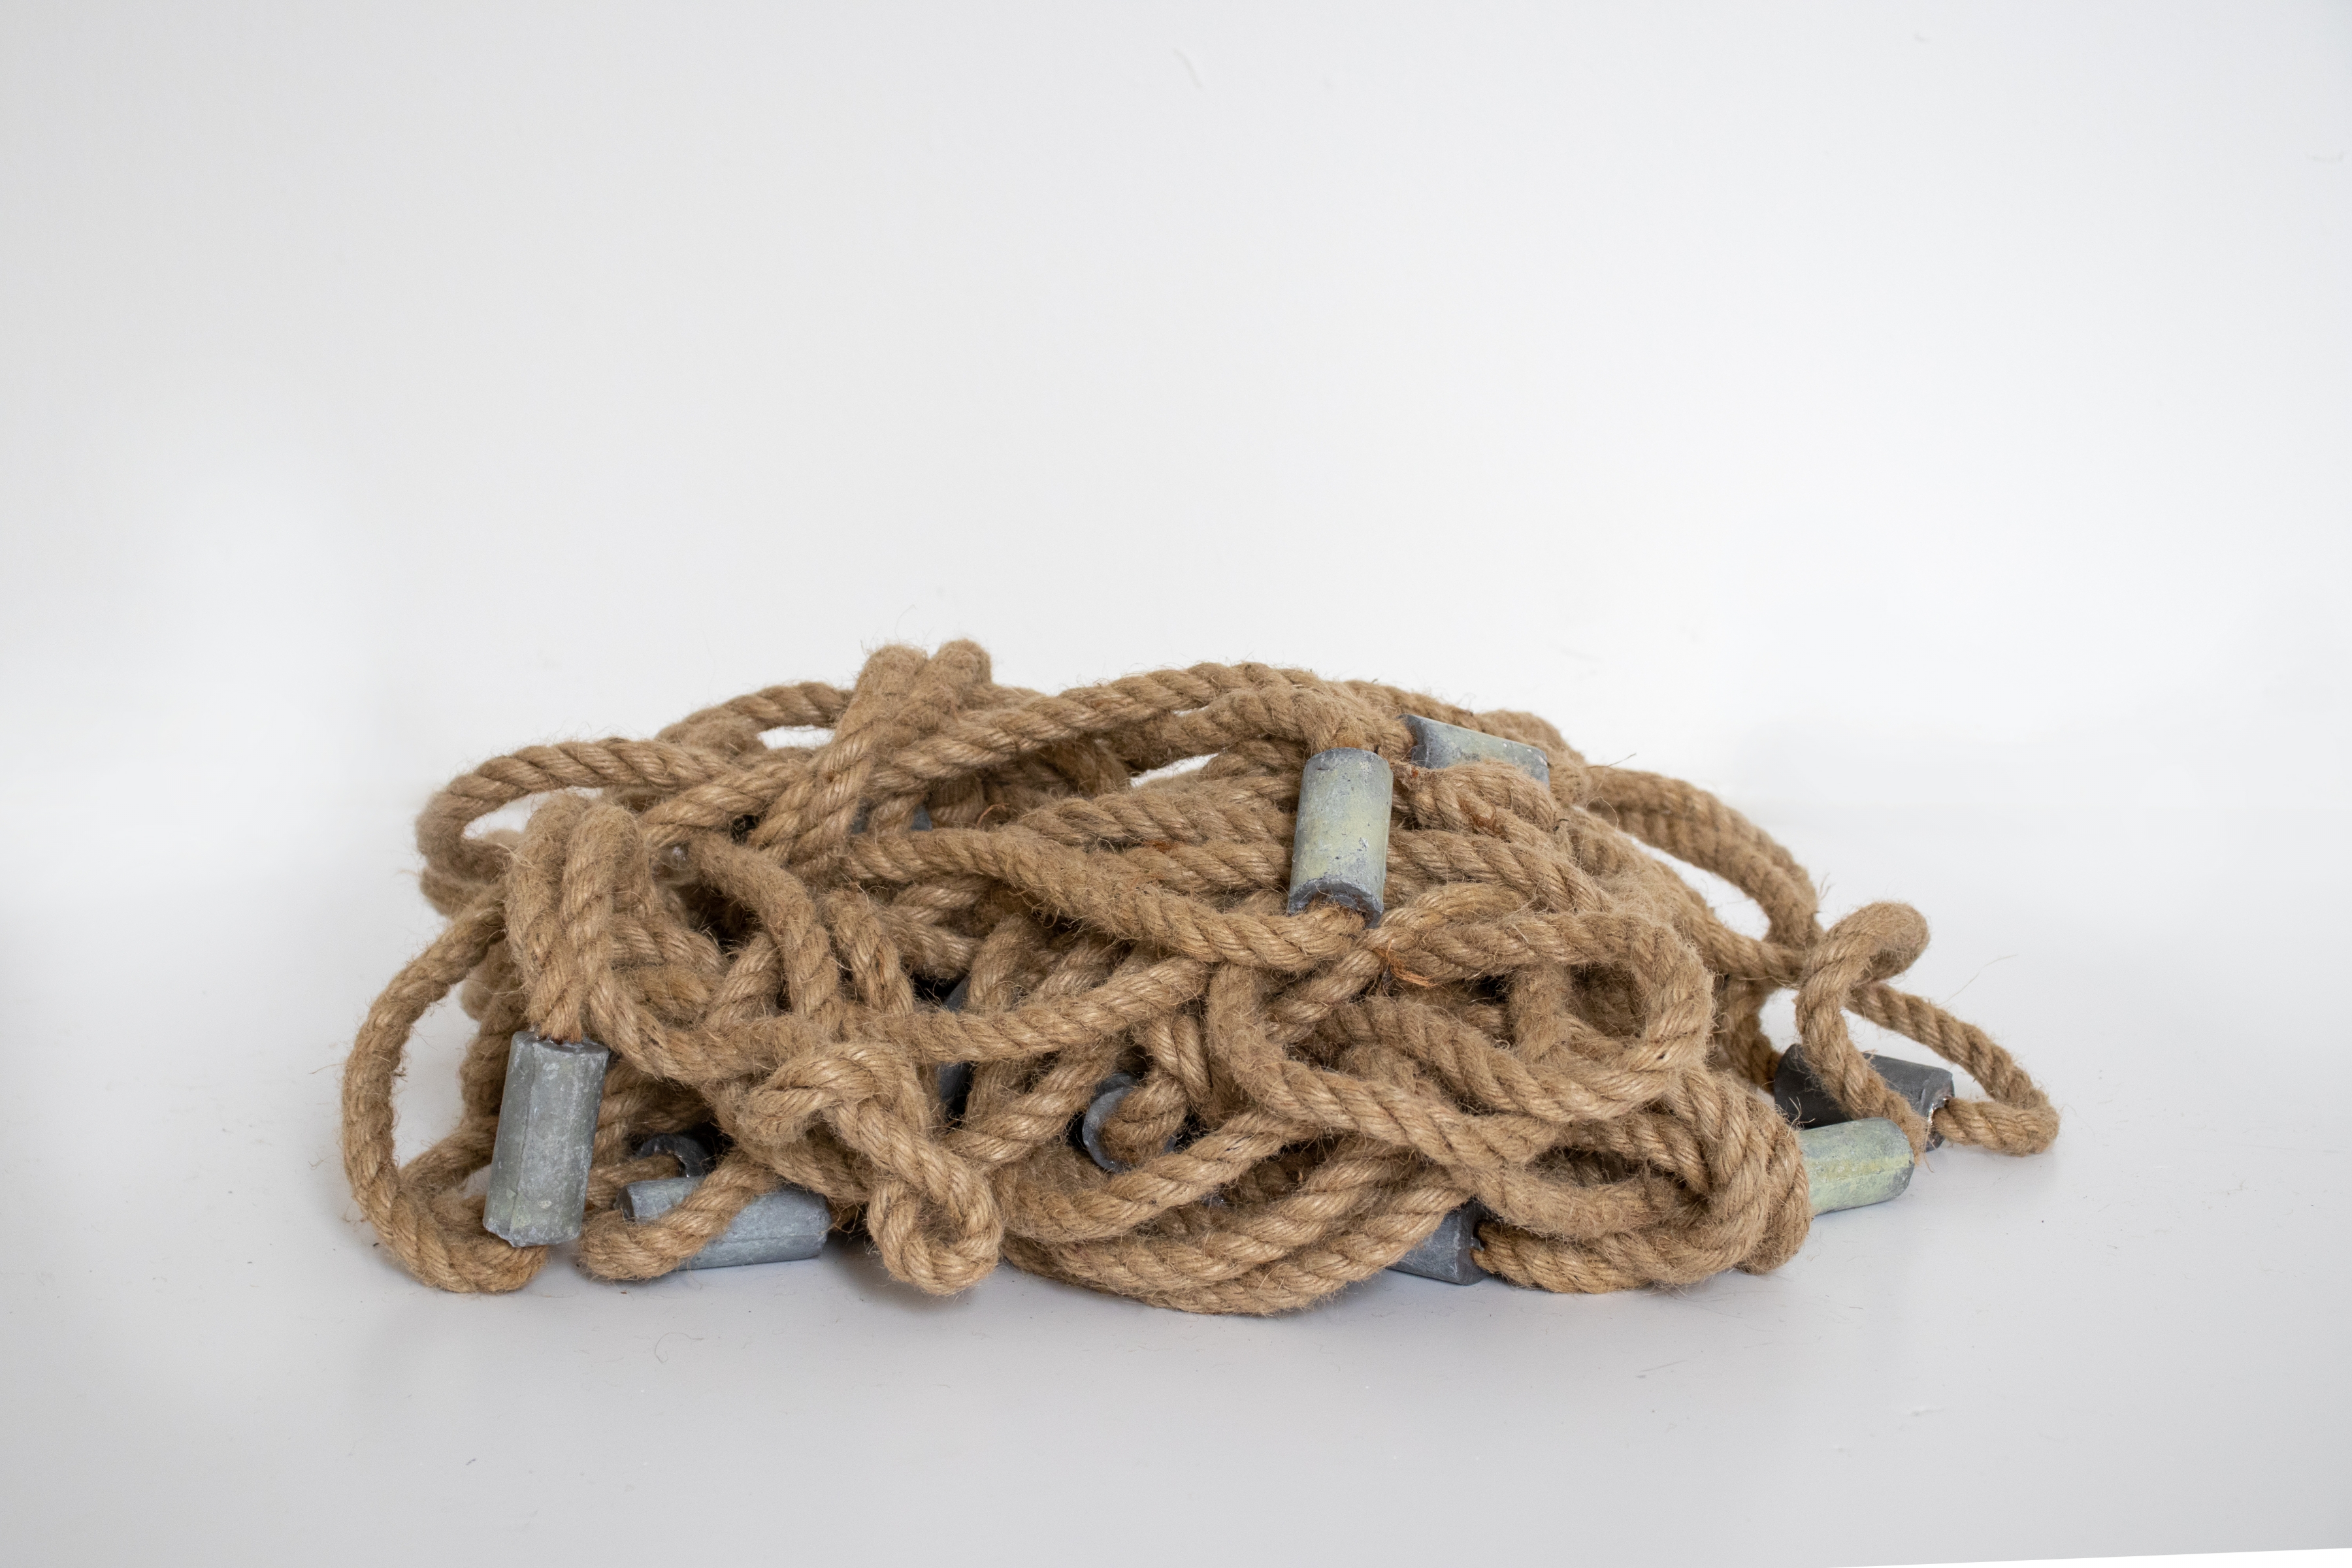 Fathom, 2020
Rope and cast lead

Length of rope: 300 cm / 118 in.

Enquiries